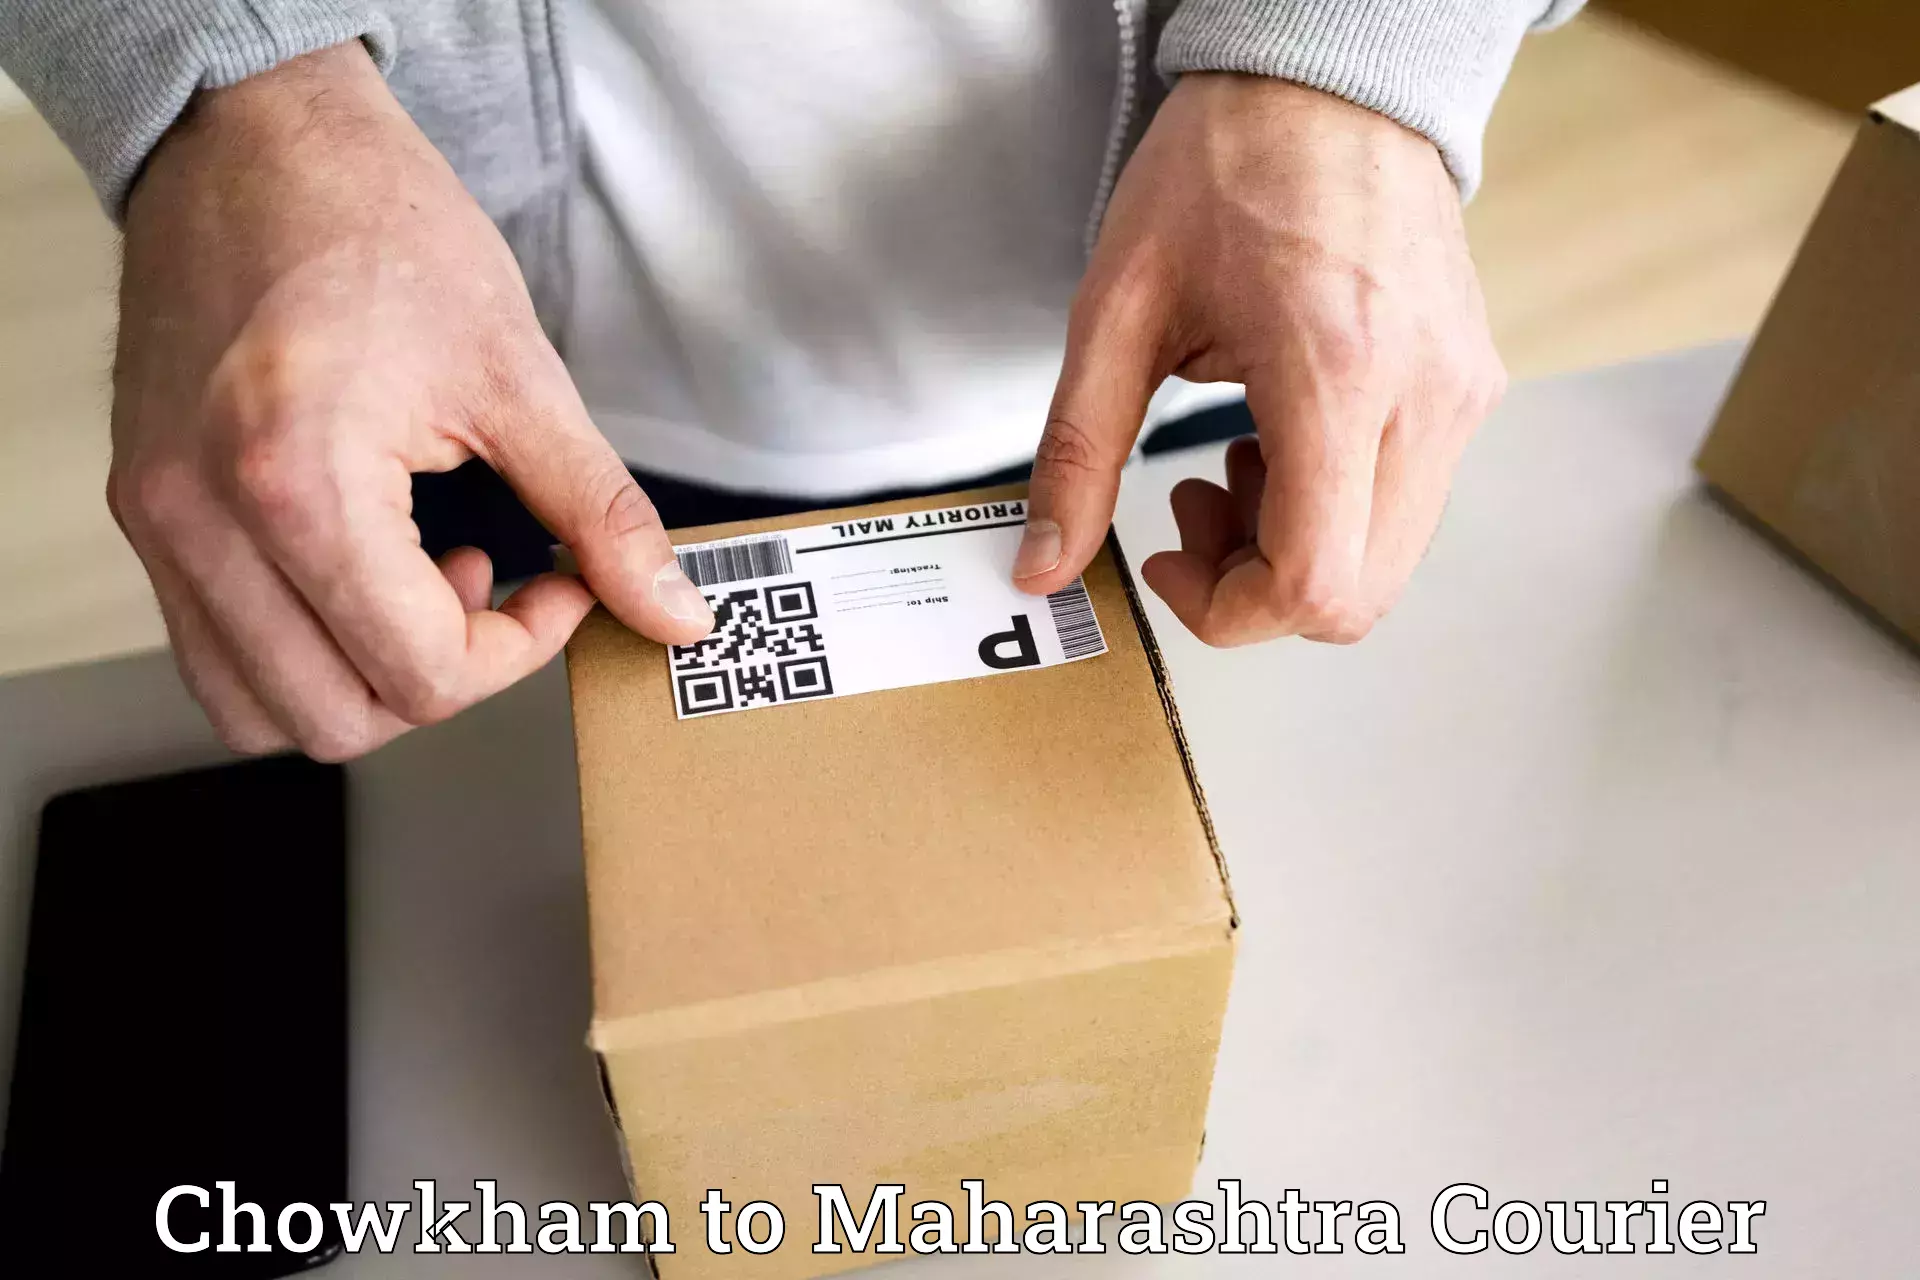 Courier service efficiency Chowkham to Mumbai Port